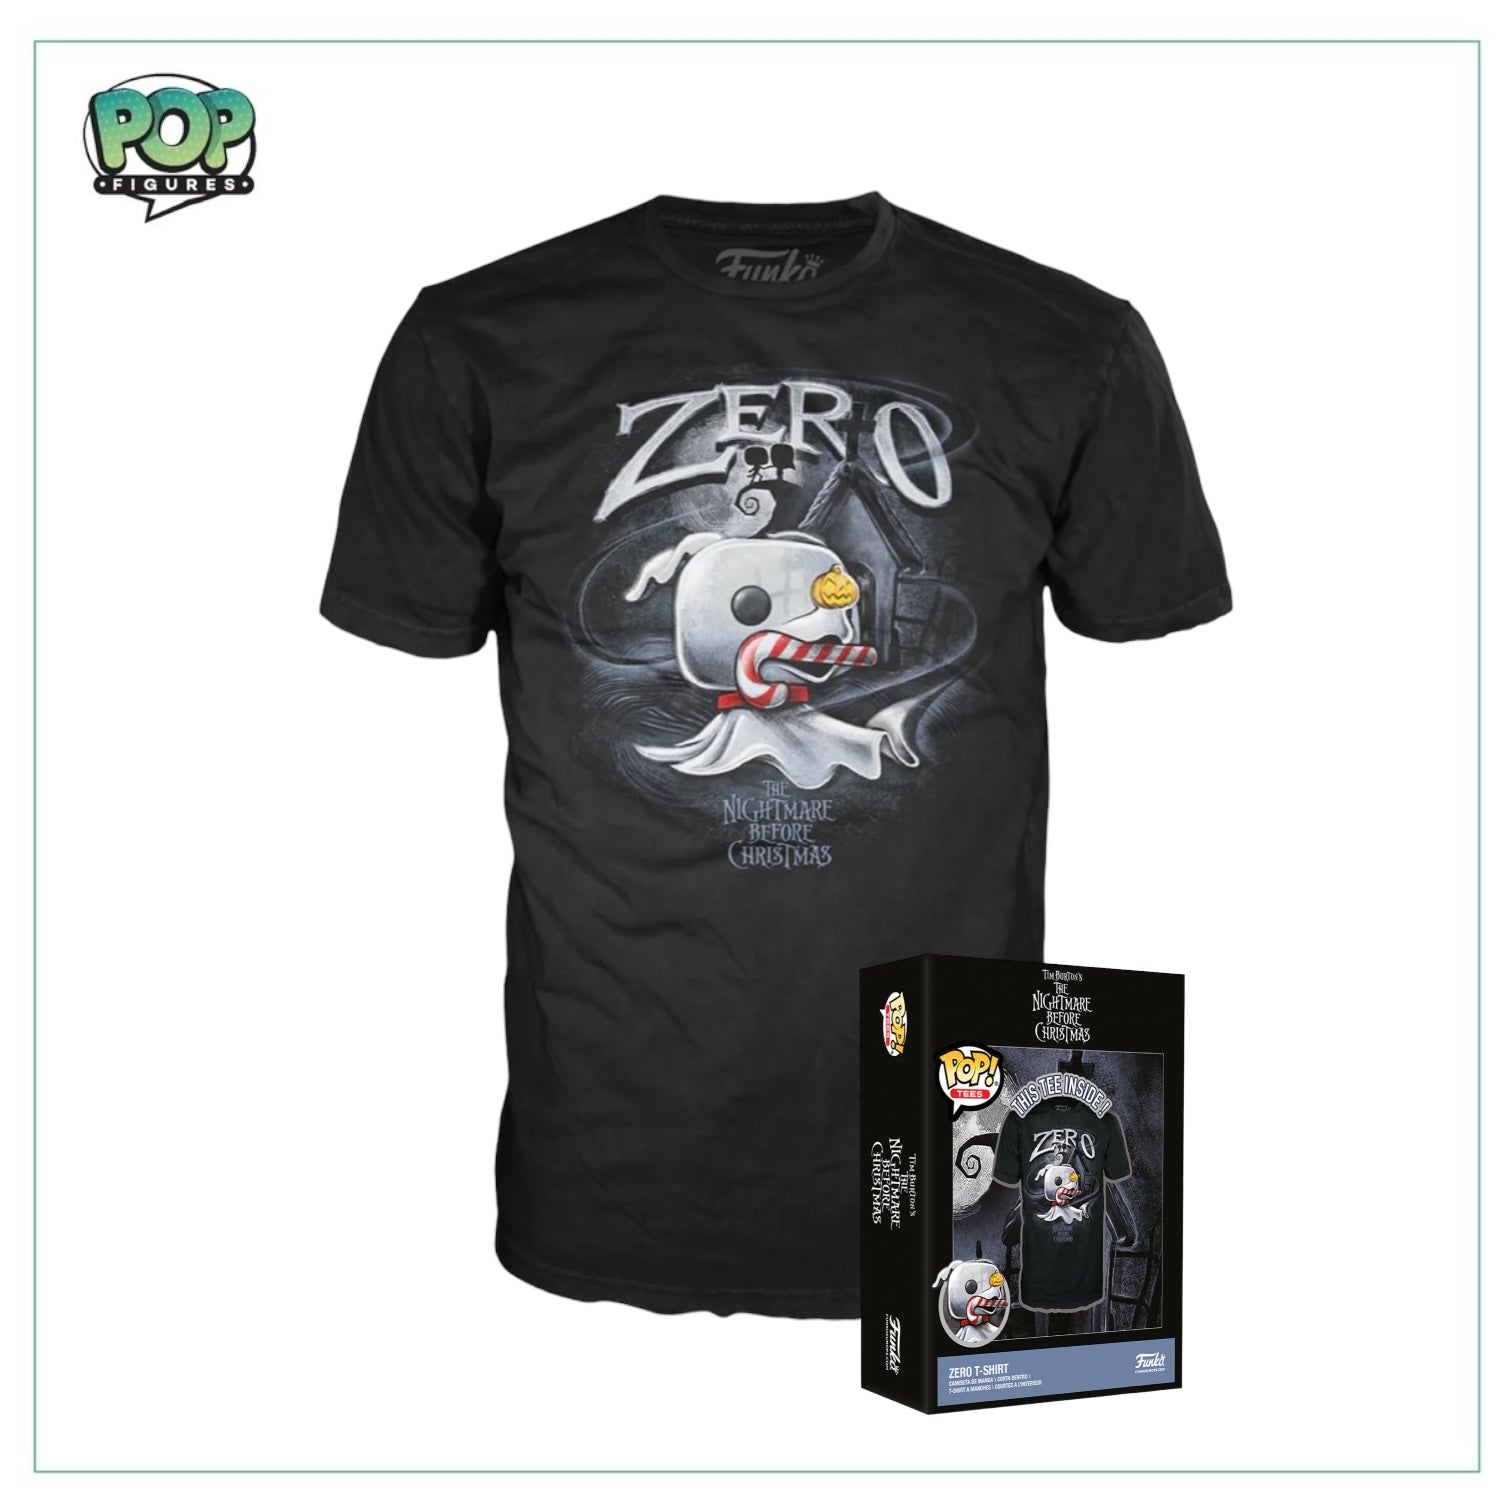 Boxed Tee - Zero with Candy Cane Funko T-Shirt- The Nightmare before Christmas